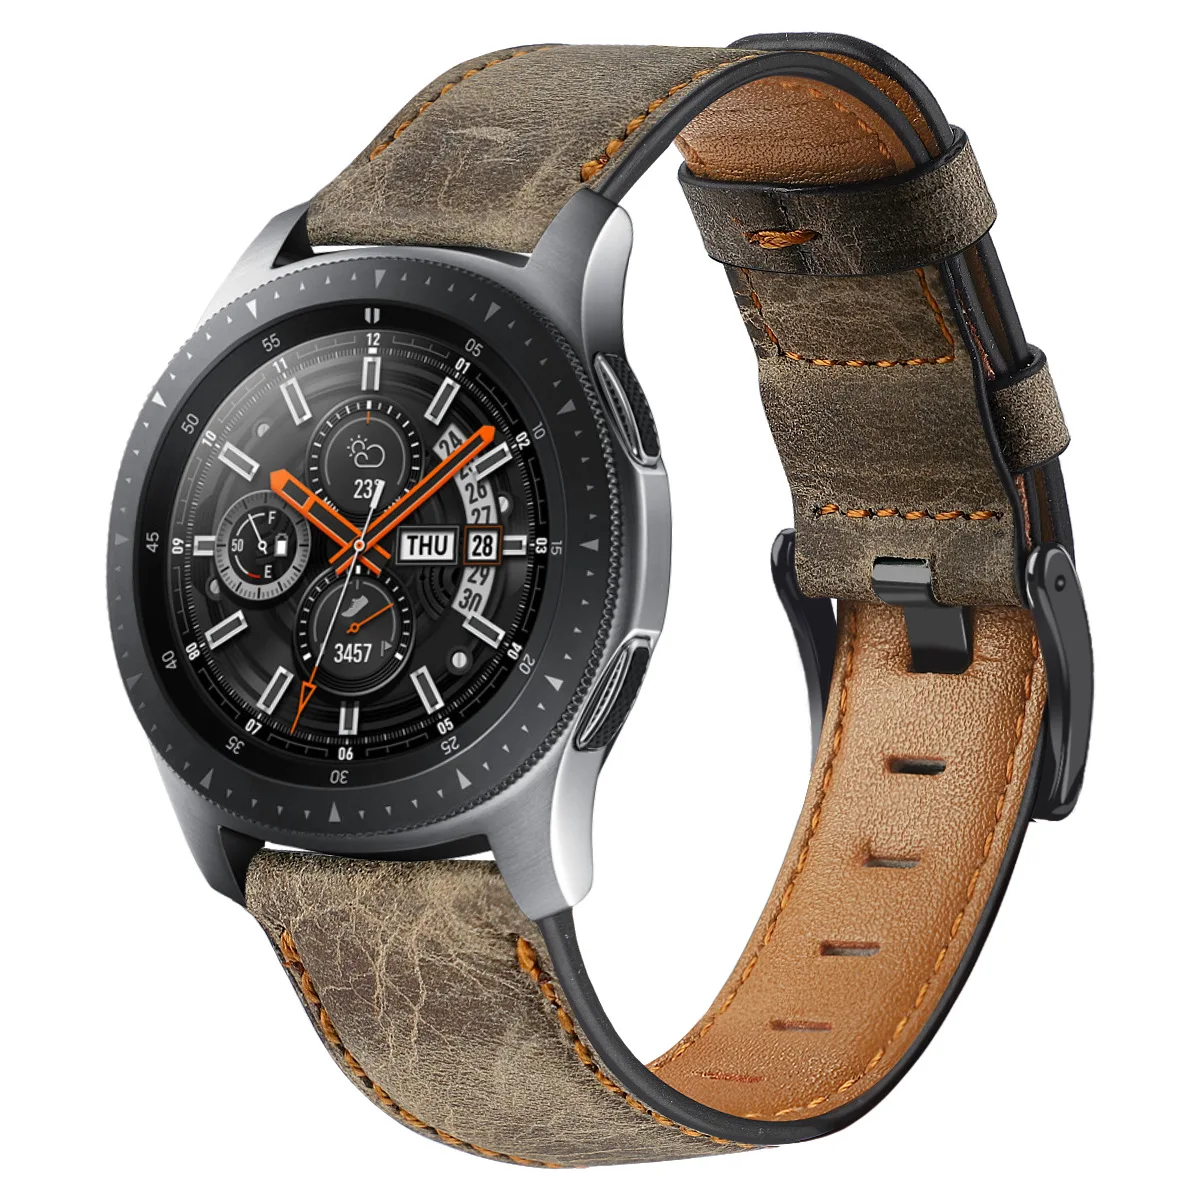 

22mm Huawei watch gt 2/2e/Pro strap for samsung Galaxy watch3 45/46mm band leather Amazfit Pace bracelet Gear S3 frontier correa